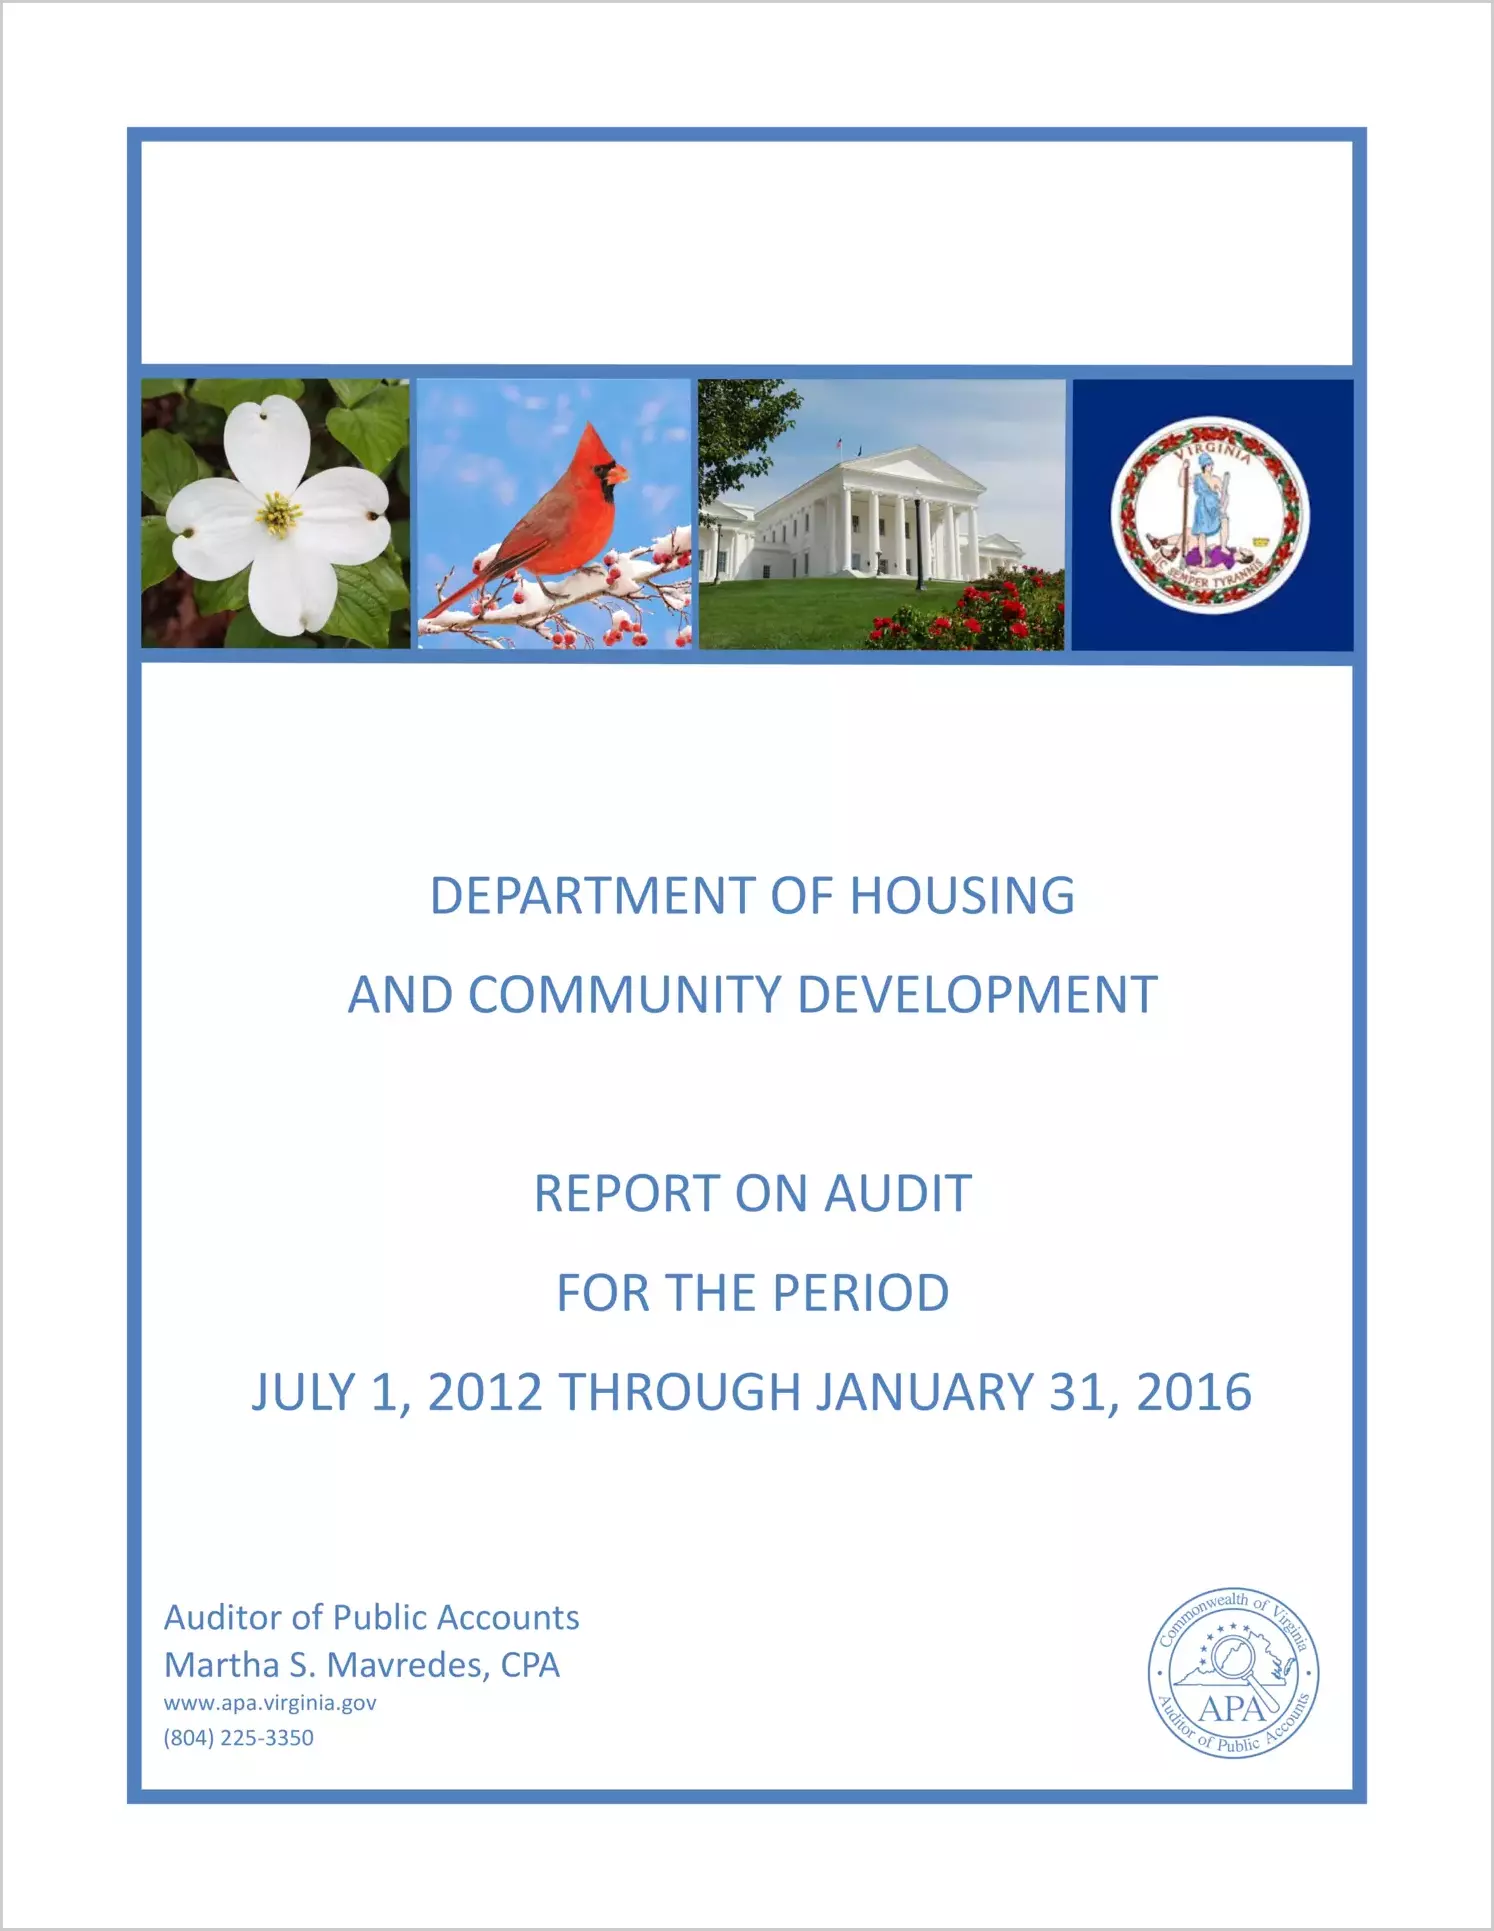 Department of Housing and Community Development report on audit for the period July 1, 2012 through January 31, 2016